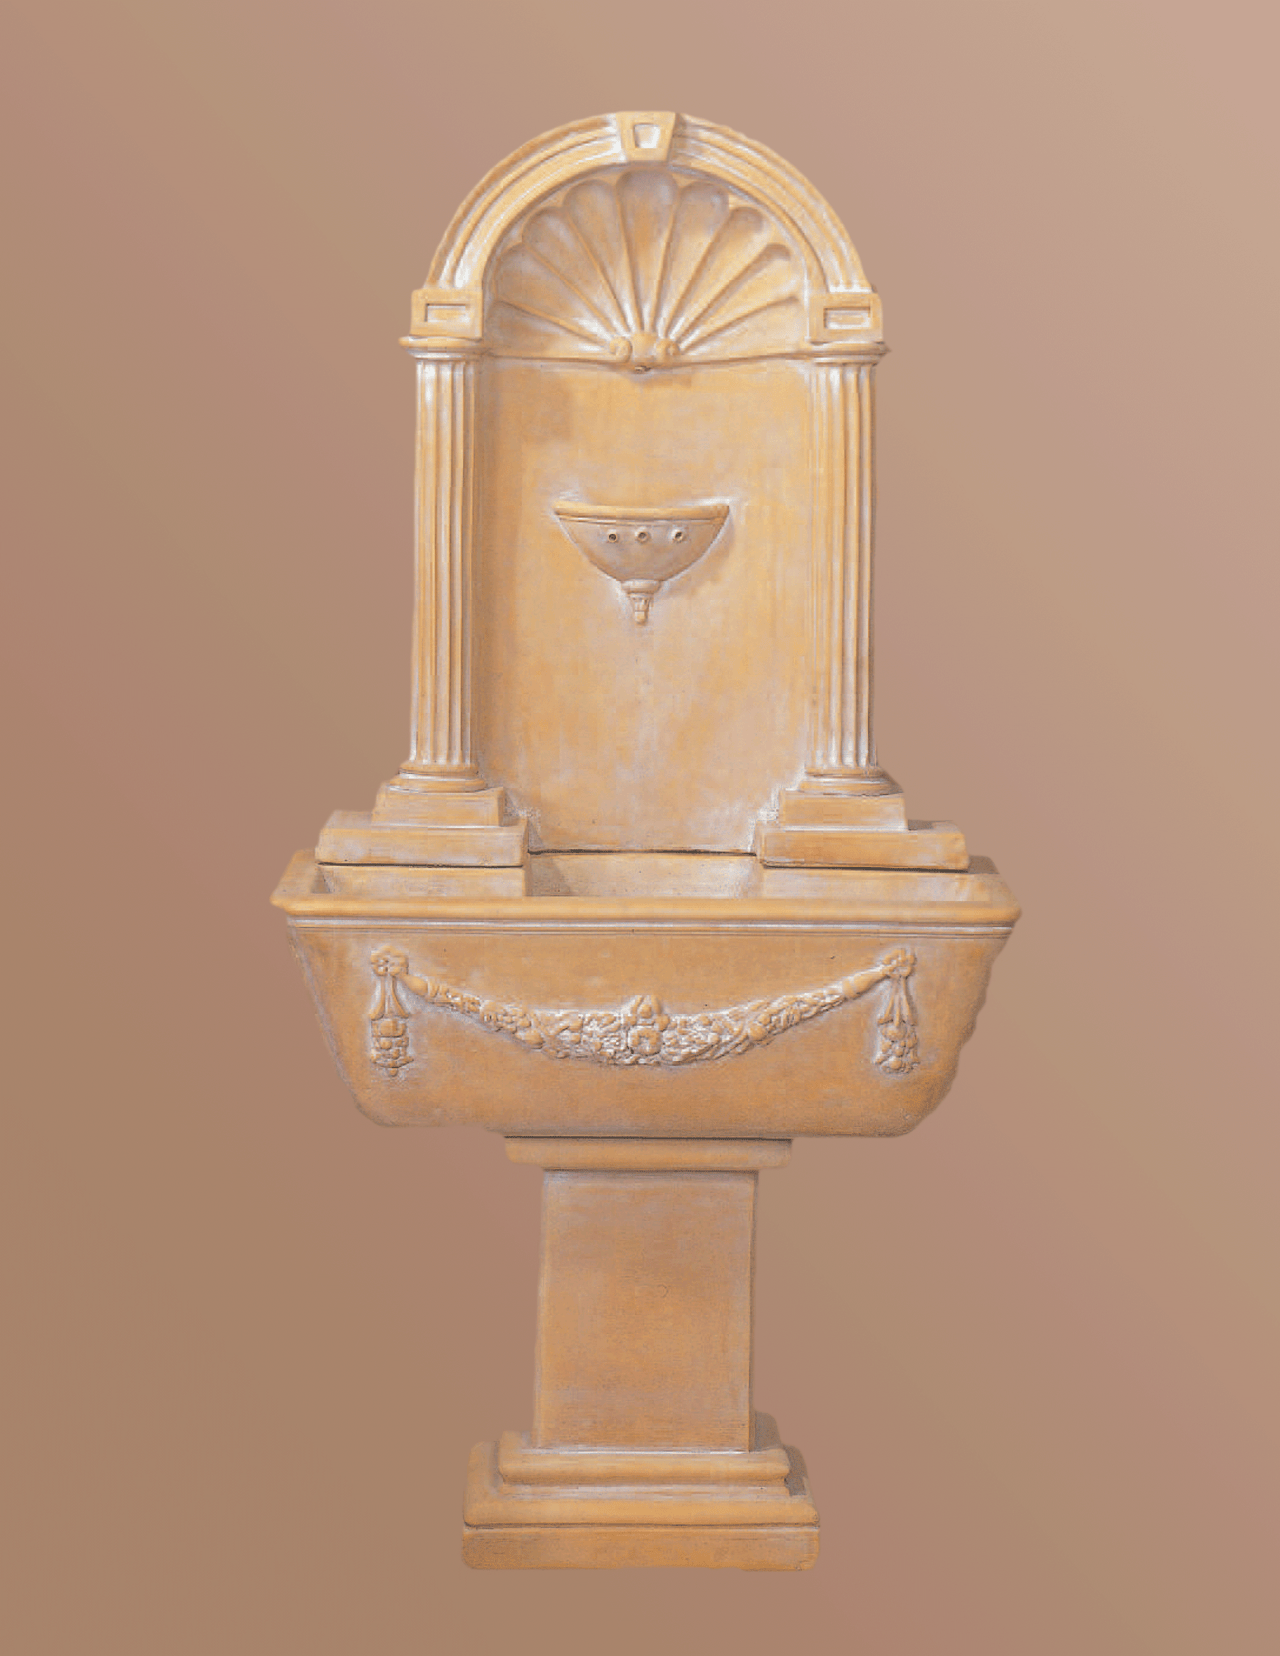 Renaissance Wall Cast Stone Outdoor Garden Fountains With Spout Fountain Tuscan 